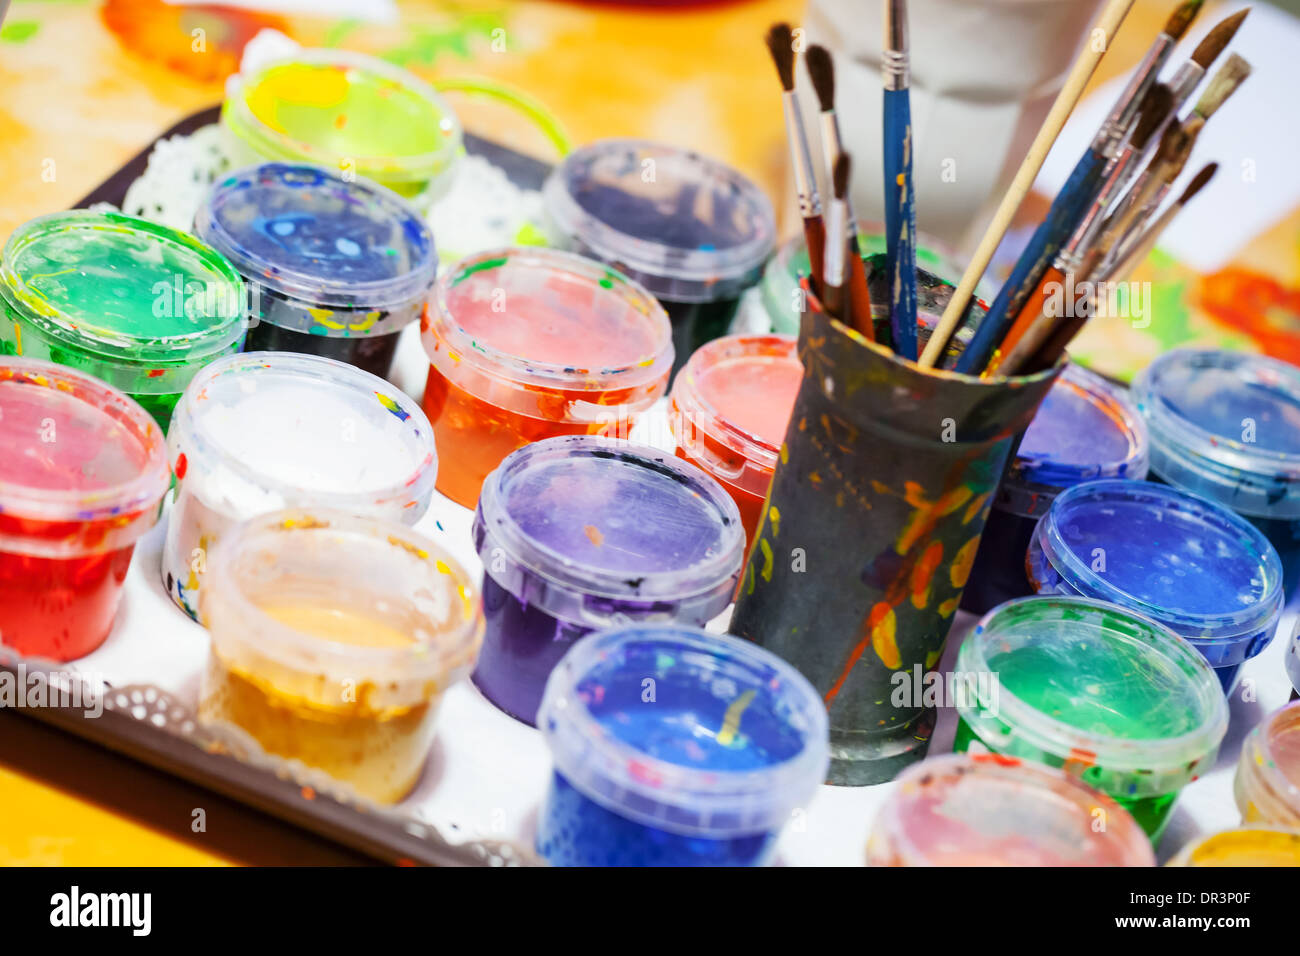 Colorful acrylic paints and brushes on the table Stock Photo